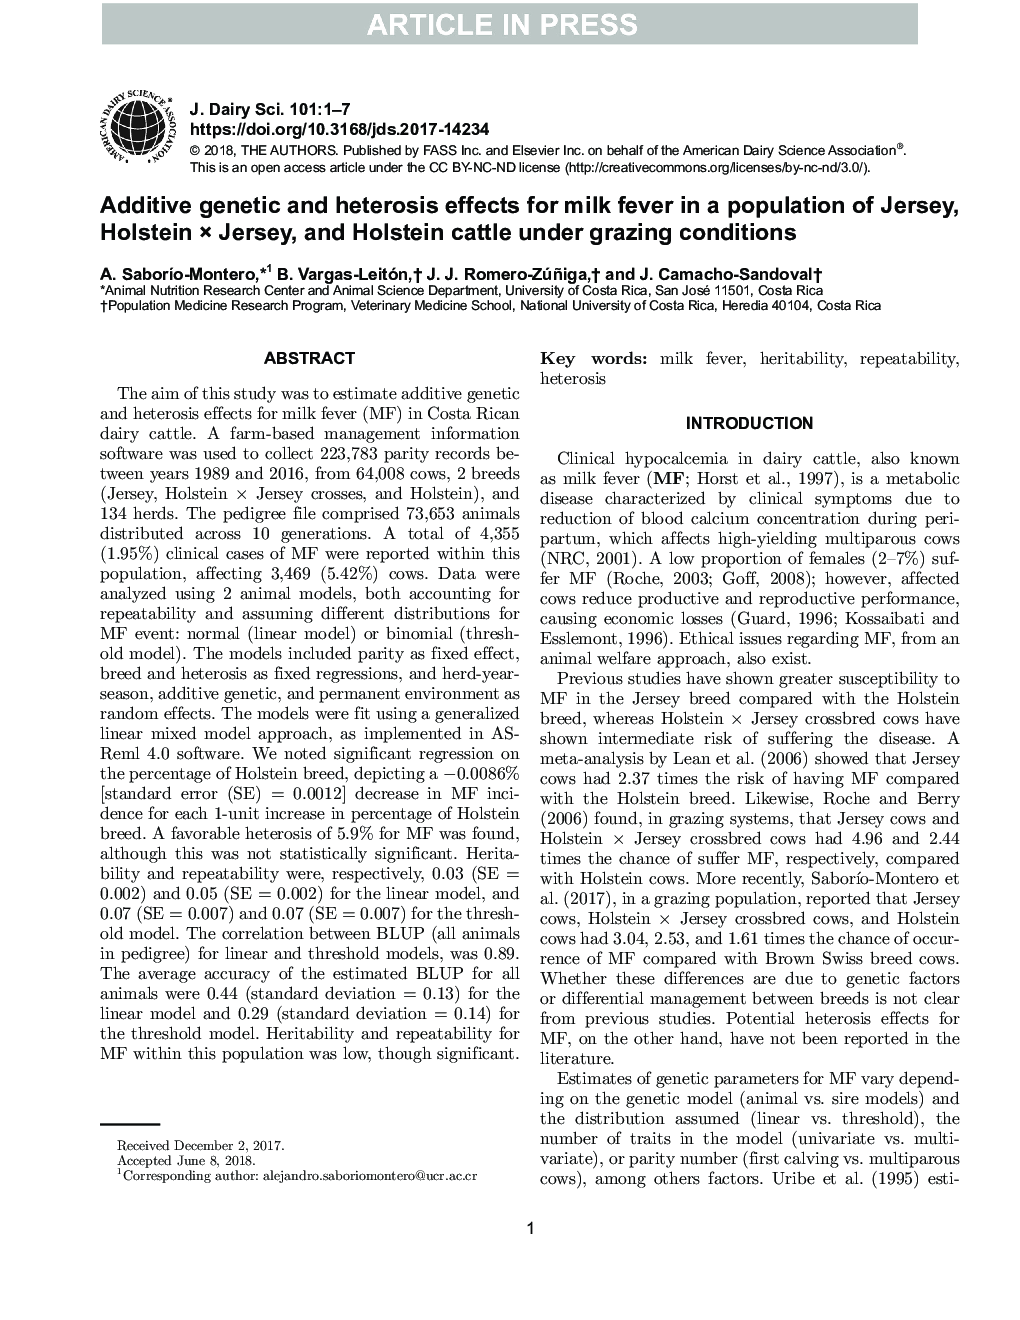 Additive genetic and heterosis effects for milk fever in a population of Jersey, Holstein Ã Jersey, and Holstein cattle under grazing conditions